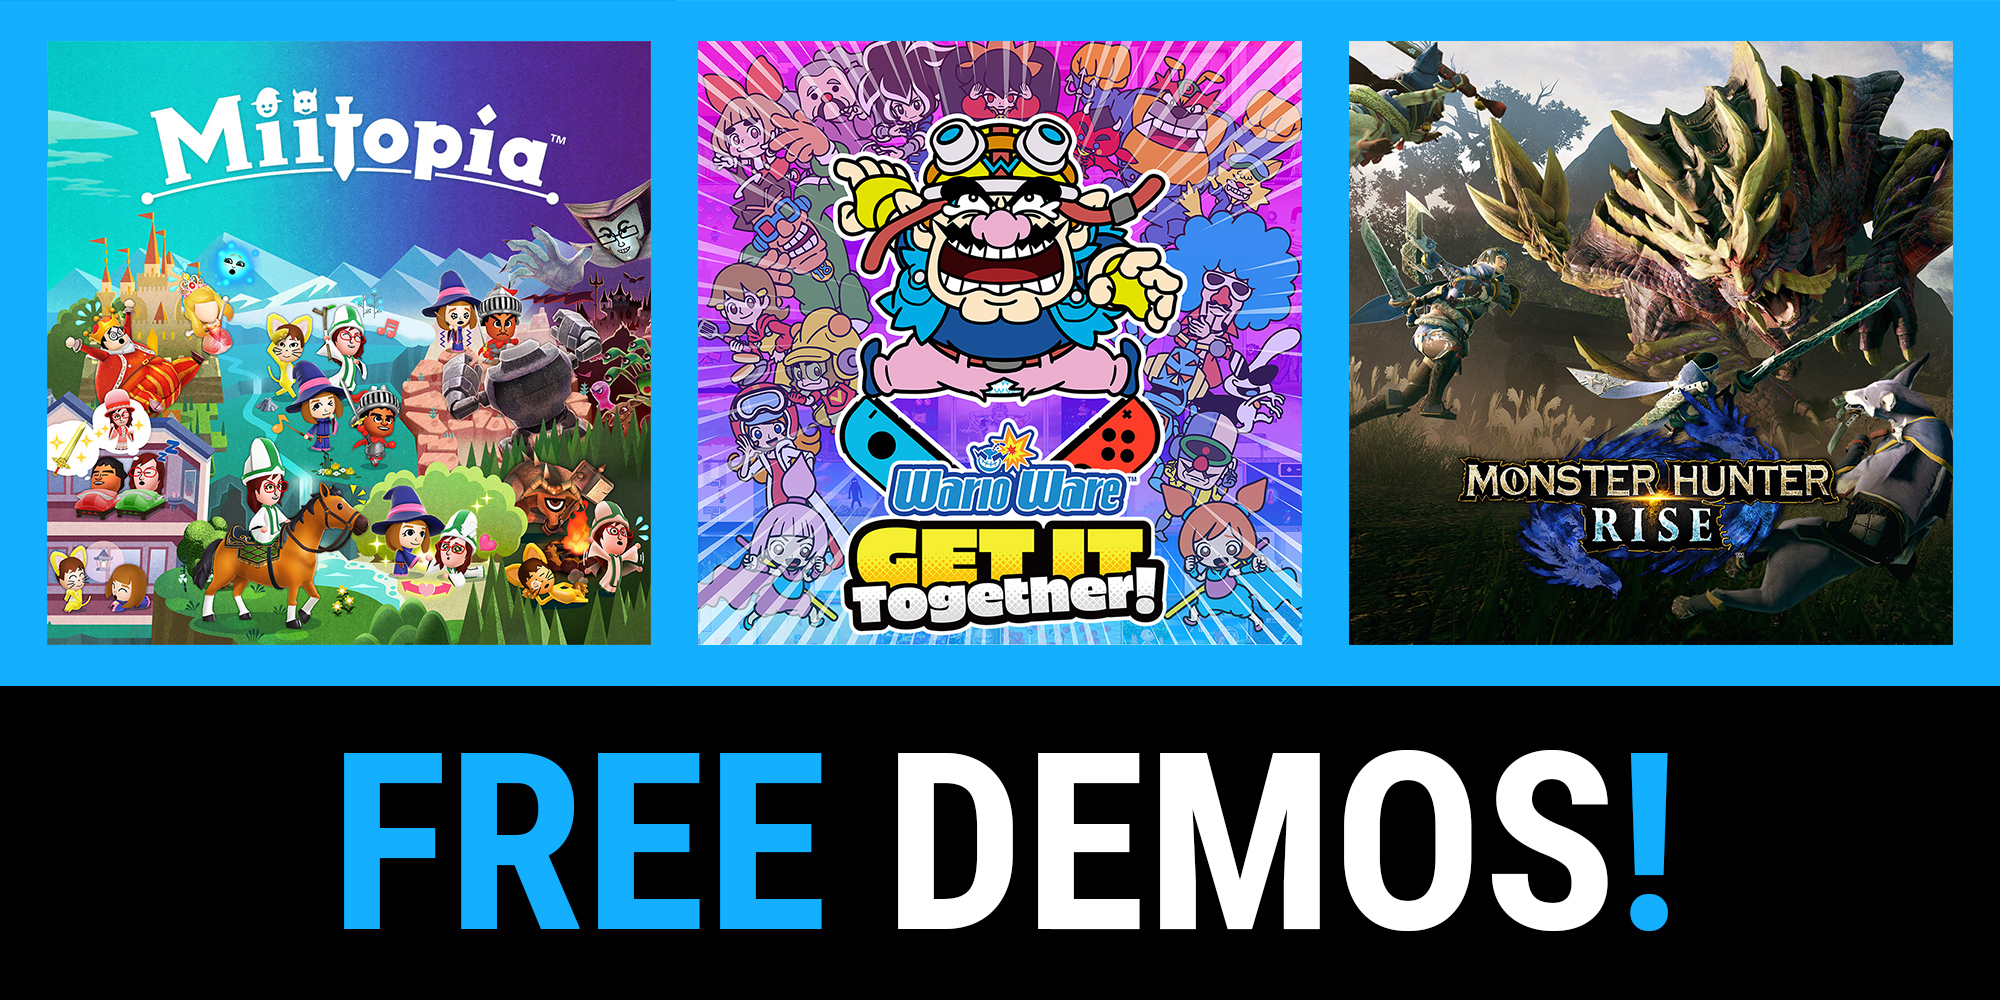 Try these games for free on Nintendo Switch! | News | Nintendo